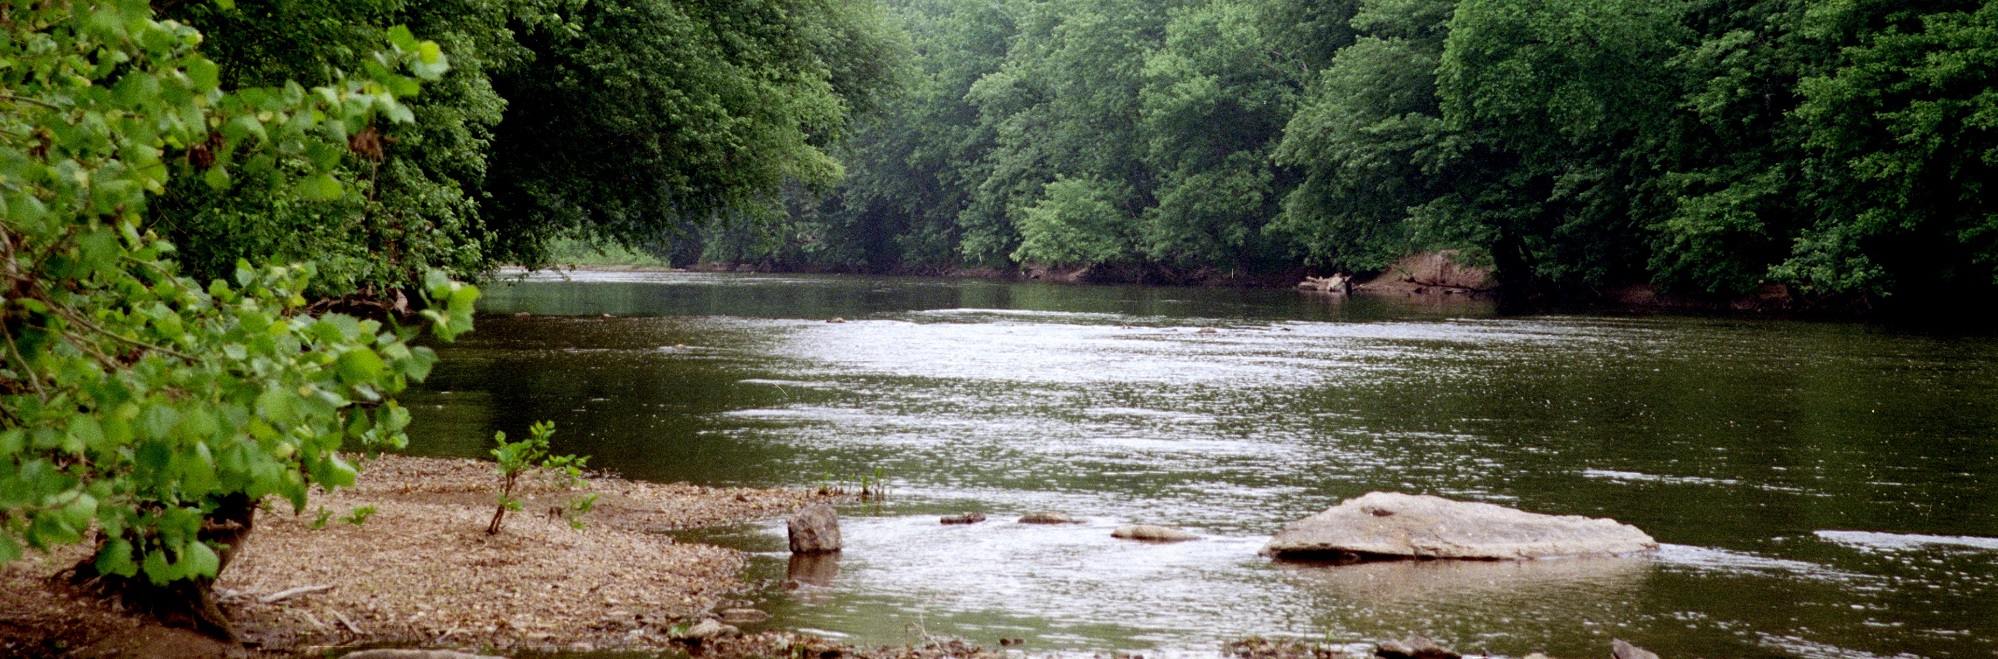 A view of Monocacy River with trees on both sides.